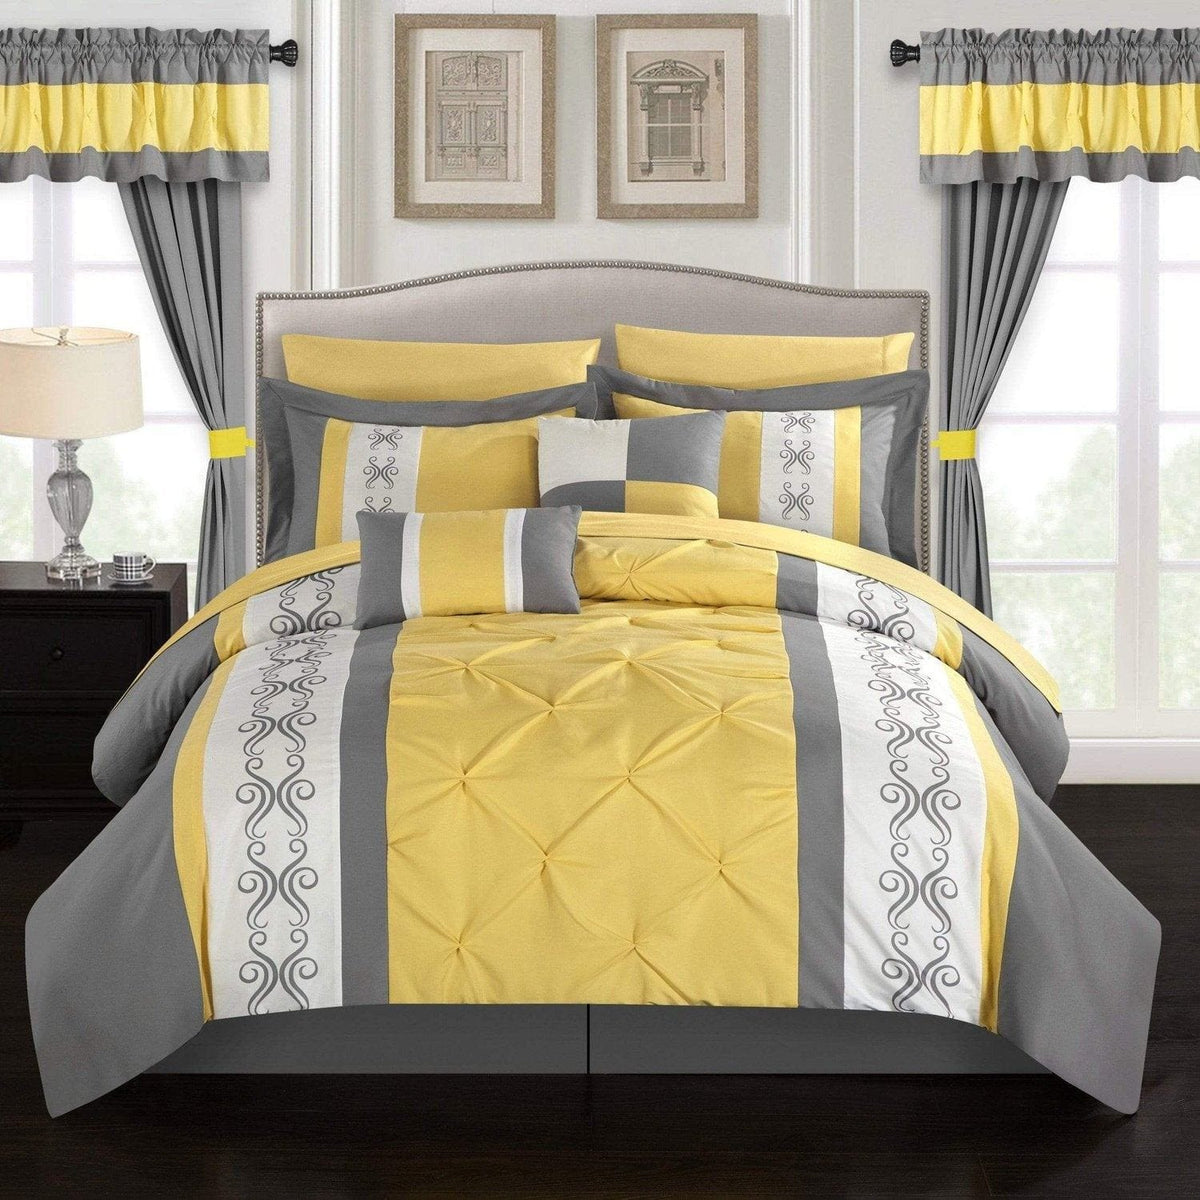 Chic Home Icaria 20 Piece Color Comforter Set Yellow